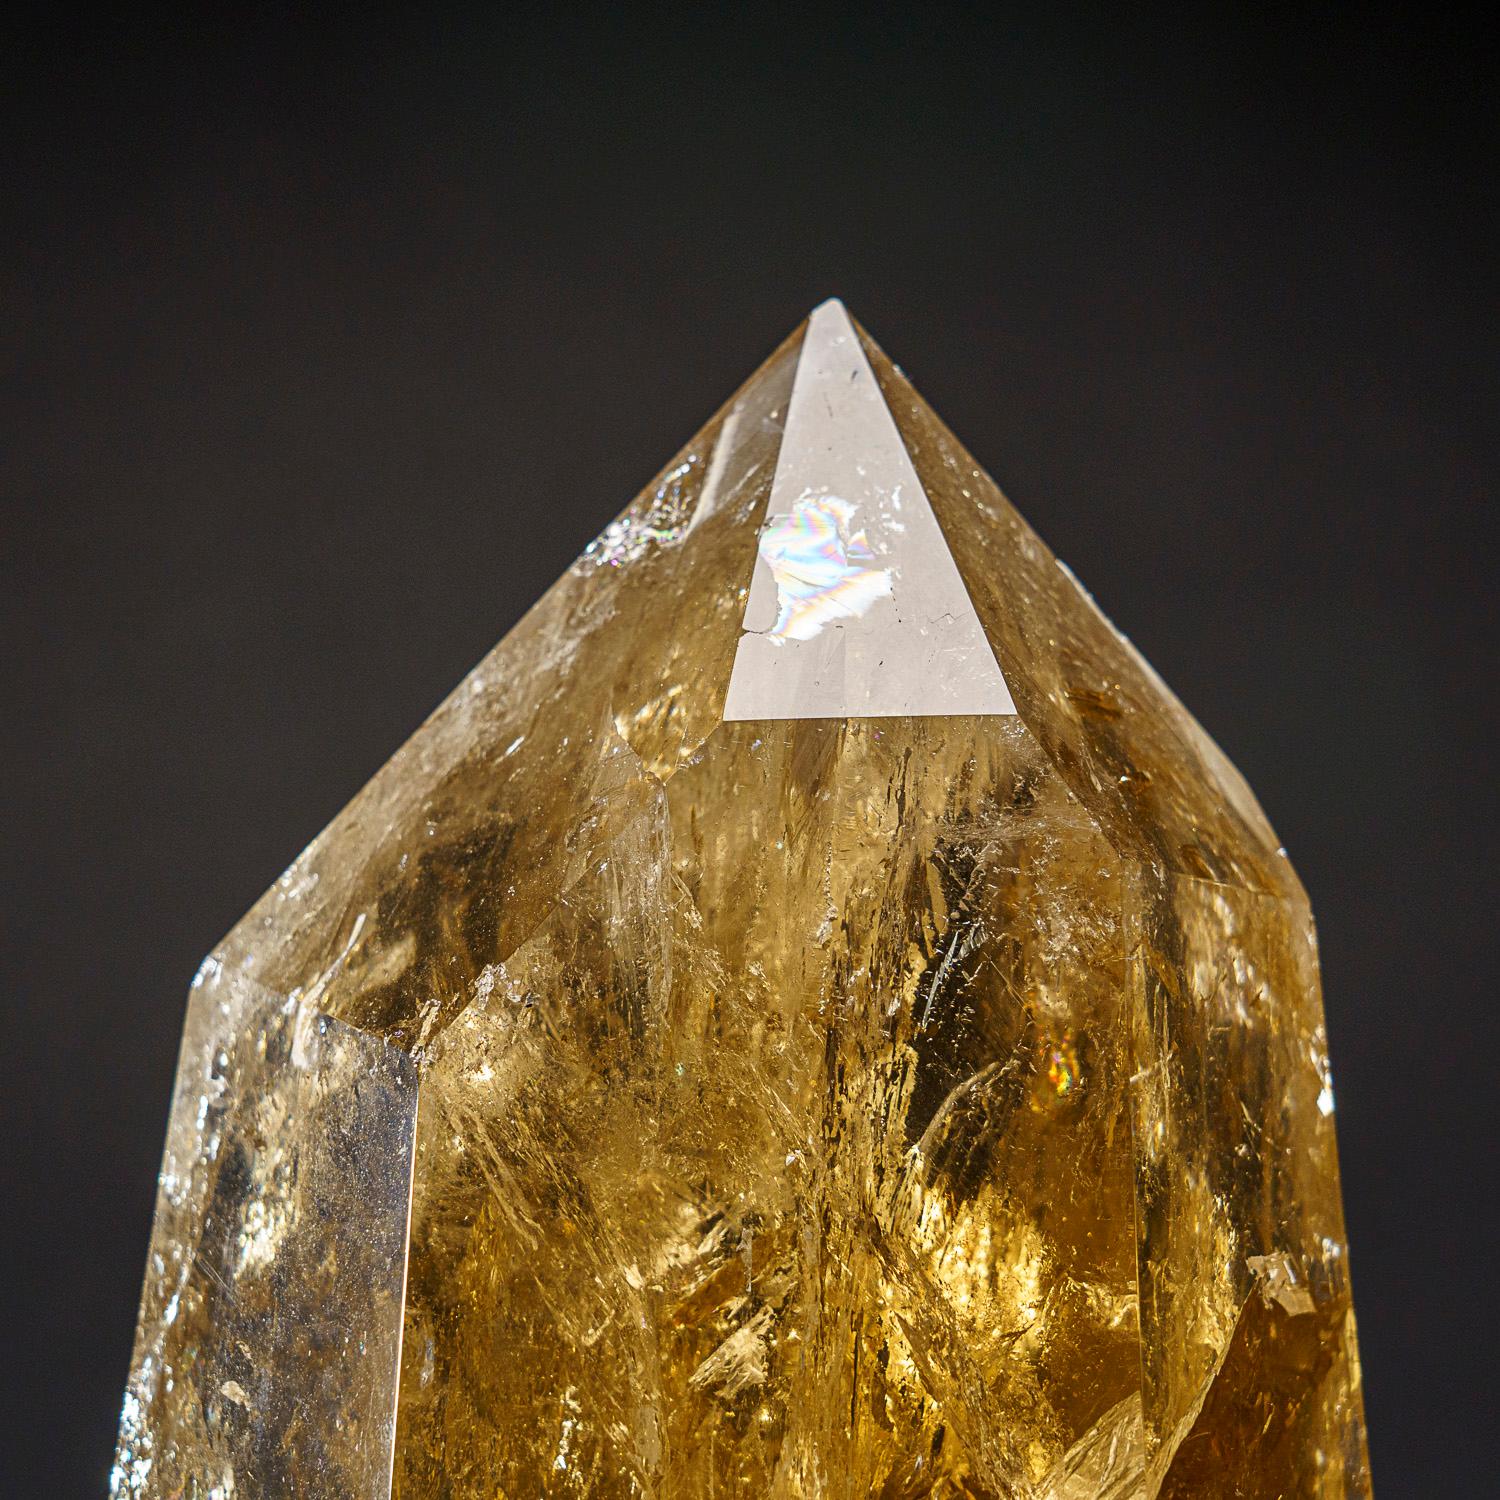 Museum-quality, large crystal of transparent Citrine quartz point with perfectly terminated faces. This world-class point is extremely large, with top luster and excellent natural smoky yellow color, internally this crystal is flawless.

Citrine can